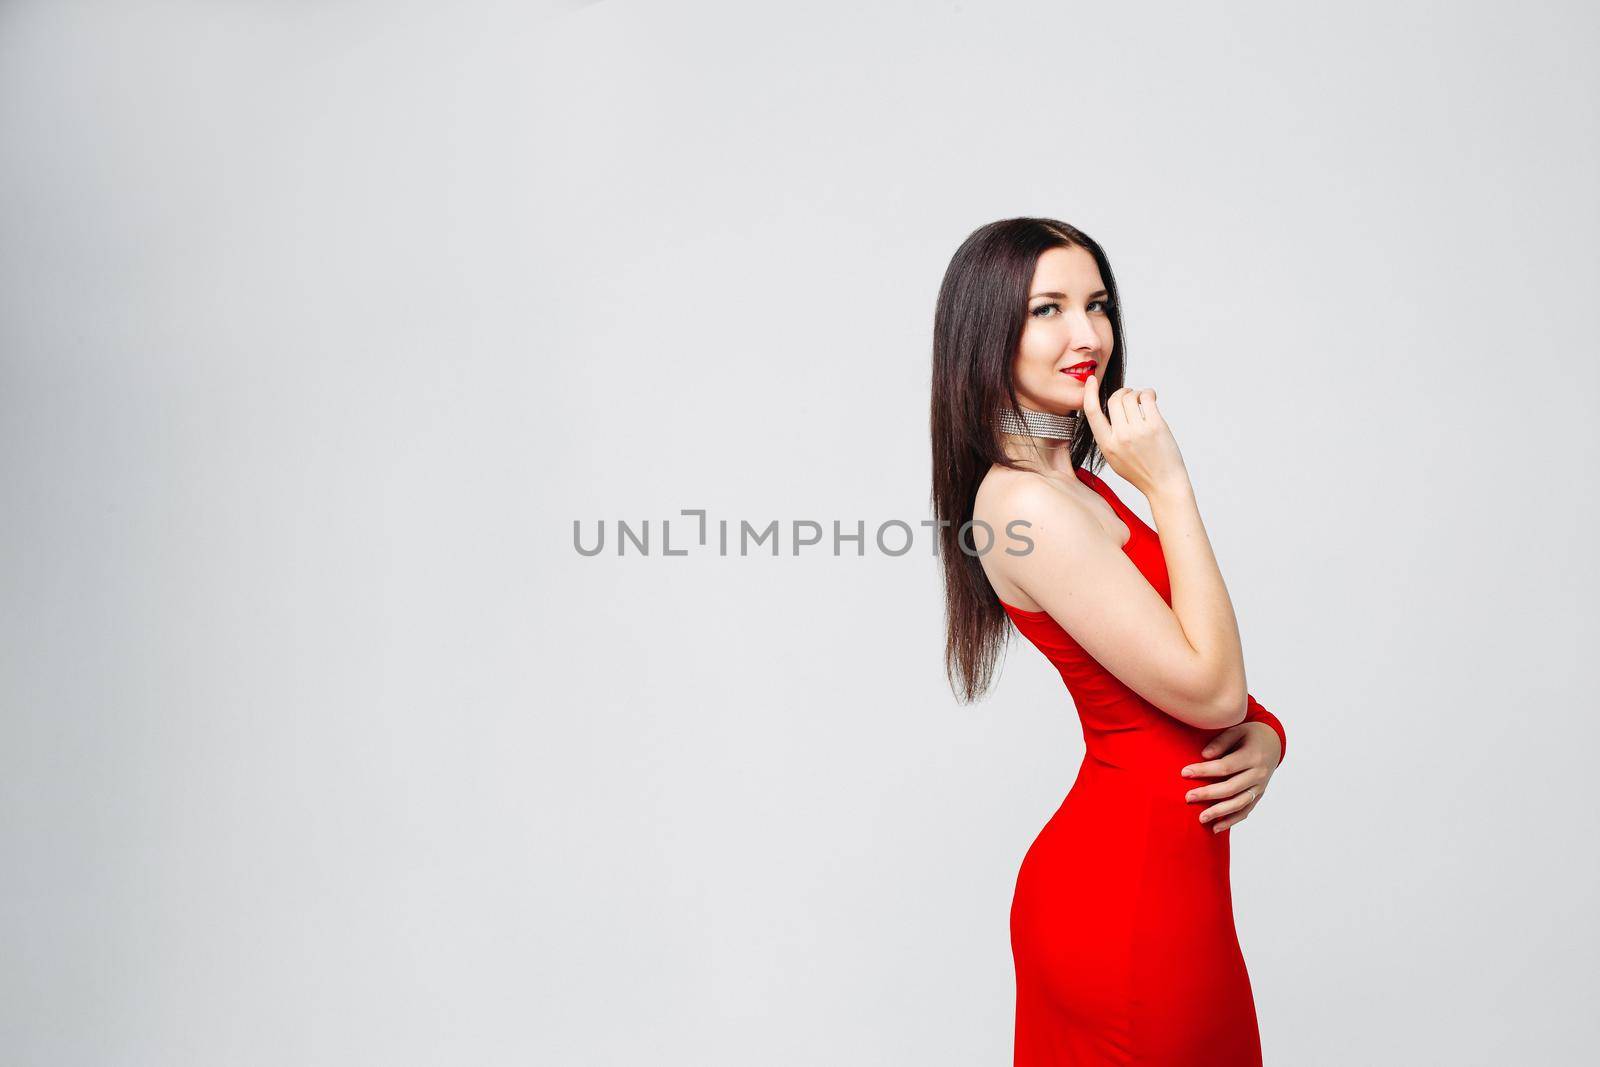 Studio portrait of beautiful sexy woman with long brunette hair wearing bright red dress and make up, embracing herself holding hand at lips over white background. Copyspace.